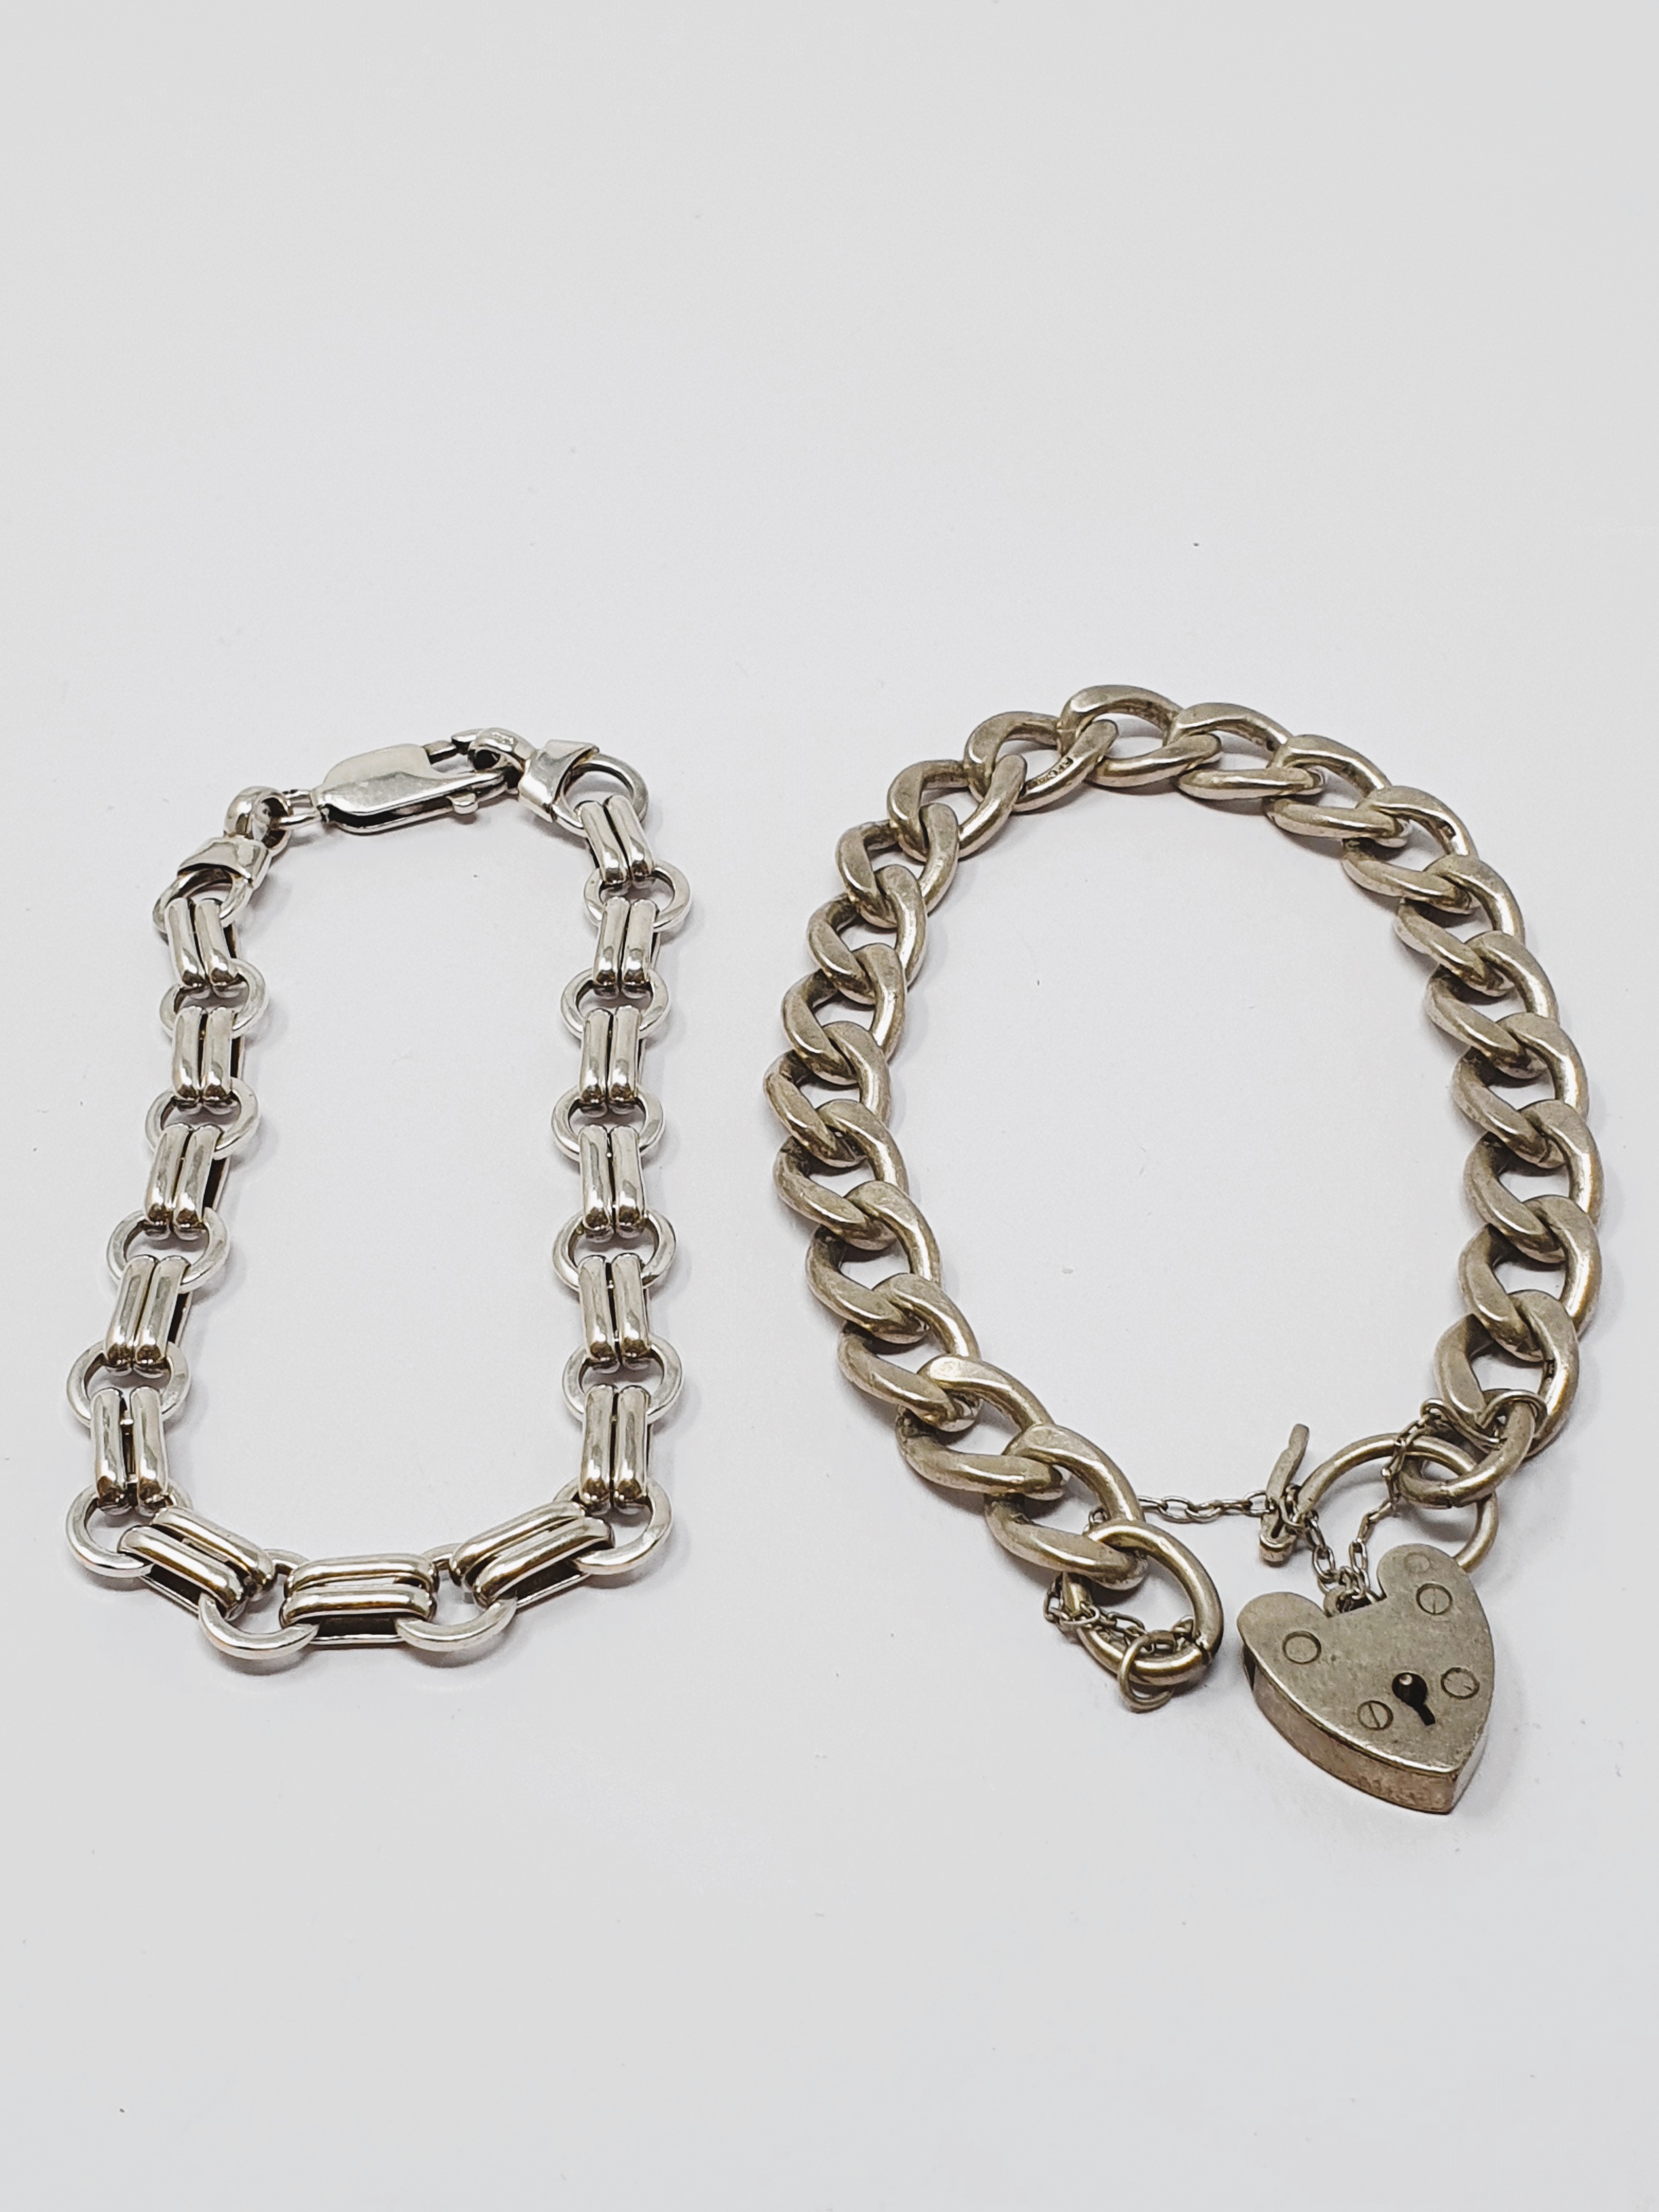 Sterling silver filed curb bracelet, padlock fastener with safety chain, gross weight 27. - Image 2 of 2